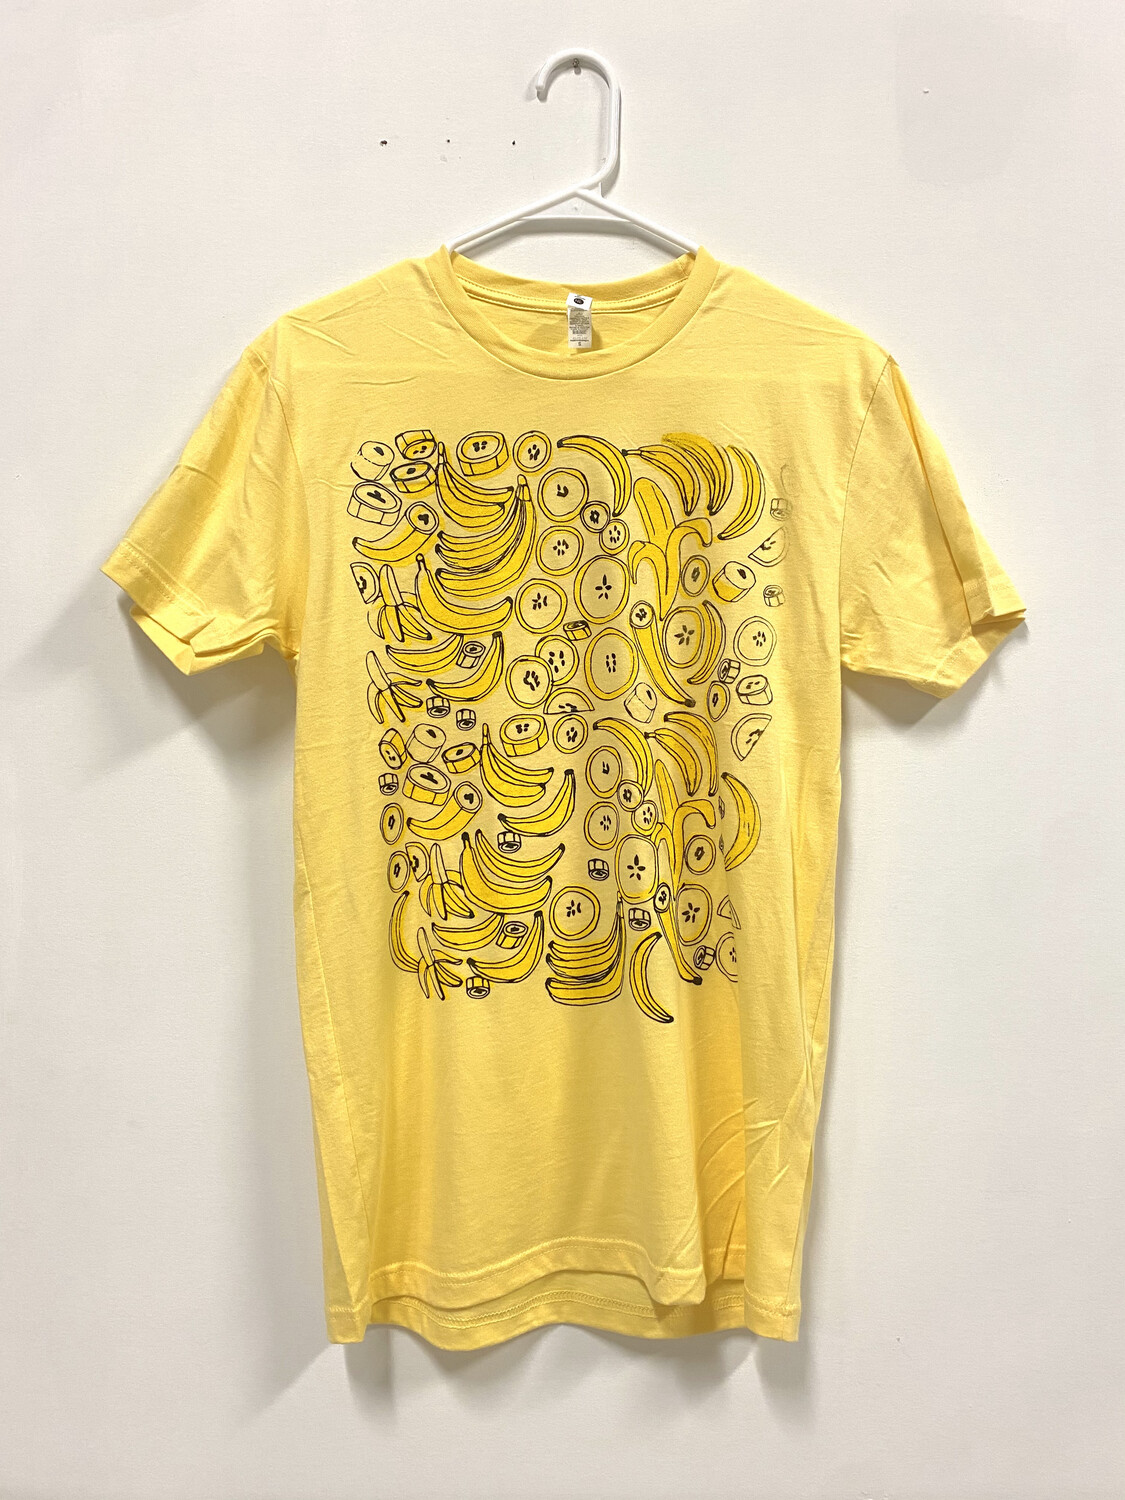 Bananas! shirt (youth sizes) by Allen Yu